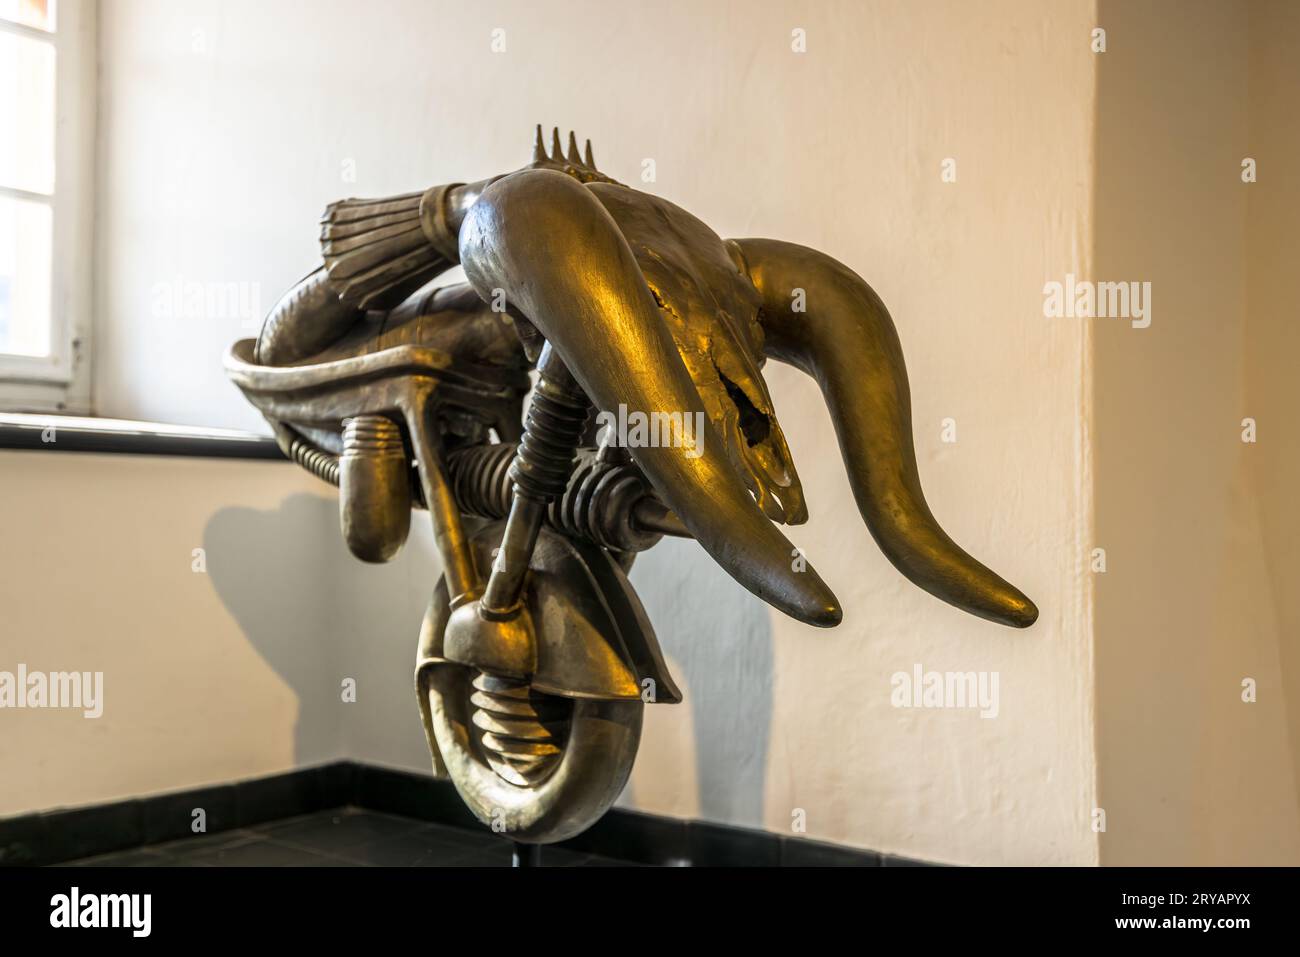 Sculpture by Hans-Ruedi Giger in the HR Giger Museum at St. Germain Castle in Gruyères. HR Giger Museum in Épagny Greyerz, Switzerland Stock Photo